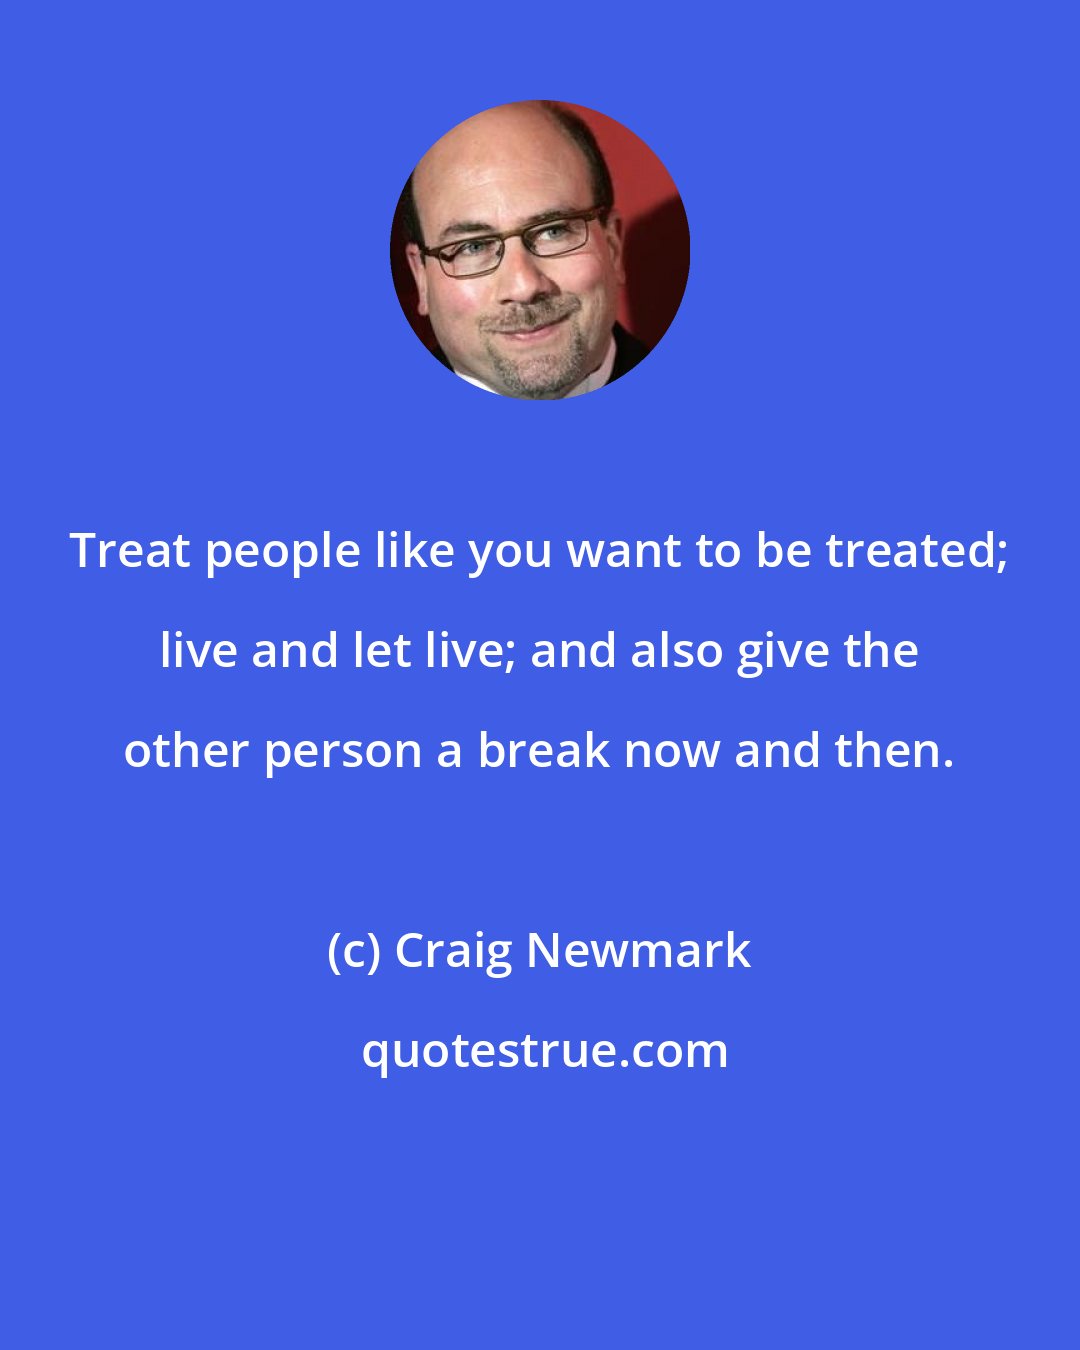 Craig Newmark: Treat people like you want to be treated; live and let live; and also give the other person a break now and then.